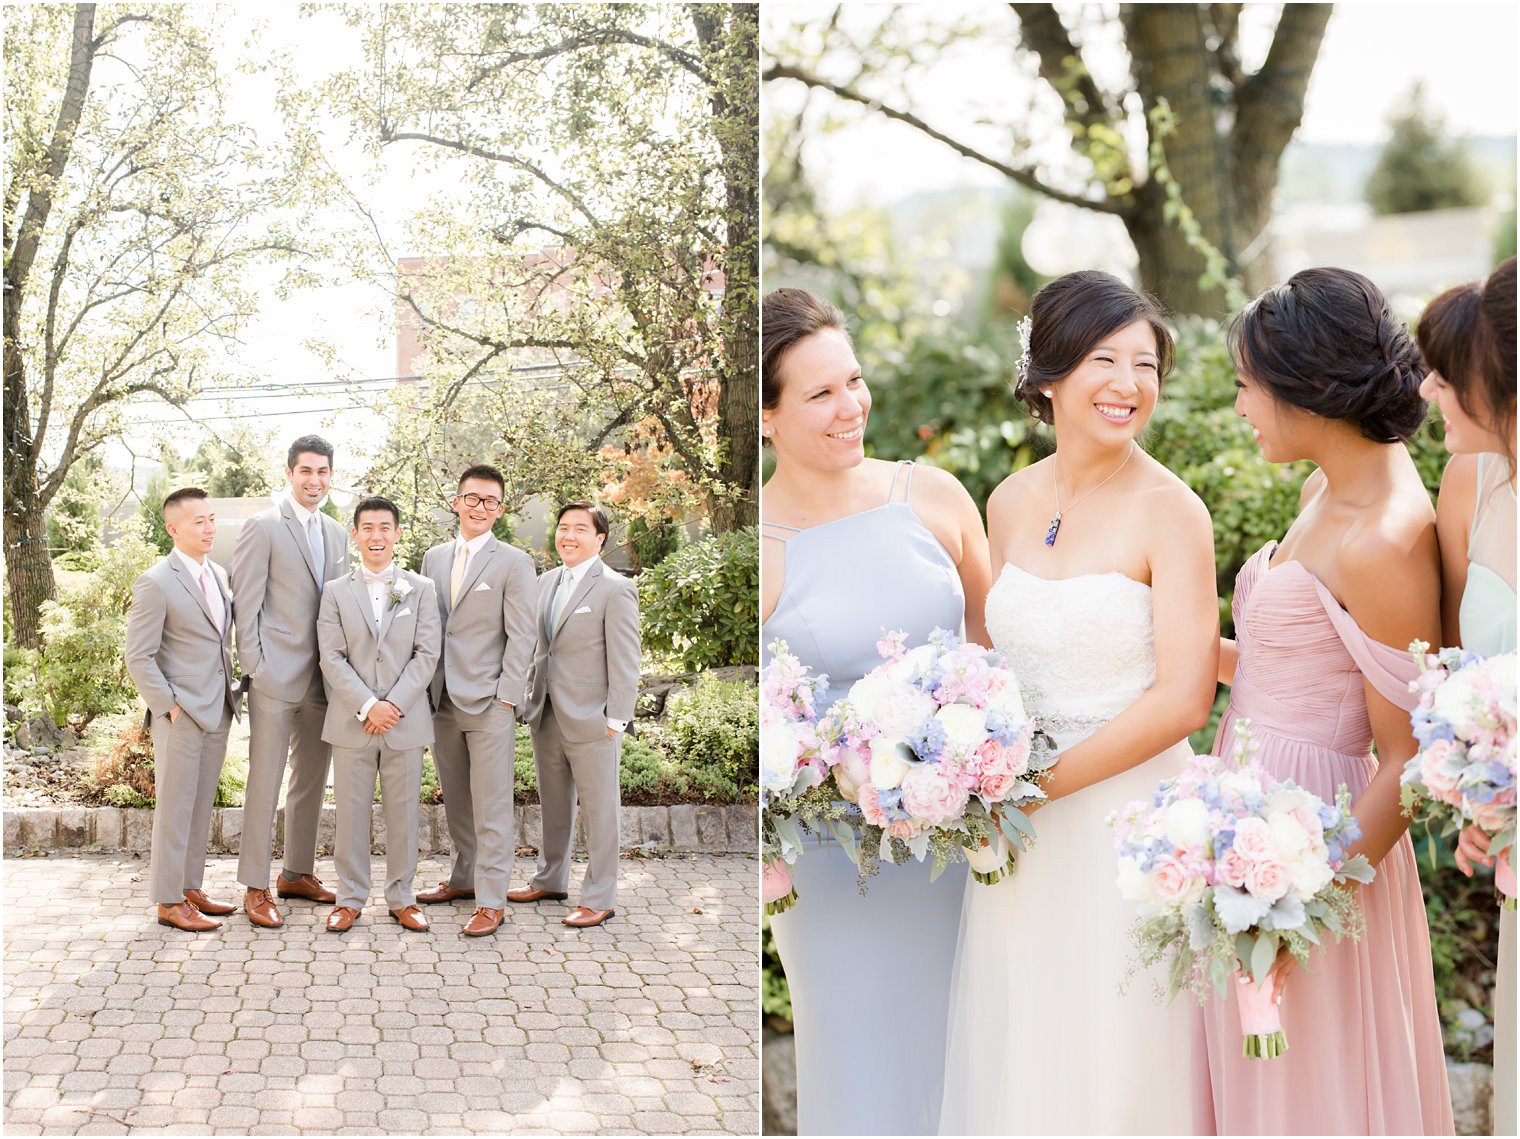 Groom with groomsmen in grey suits and bride with bridesmaids in pastel dresses at The Bethwood